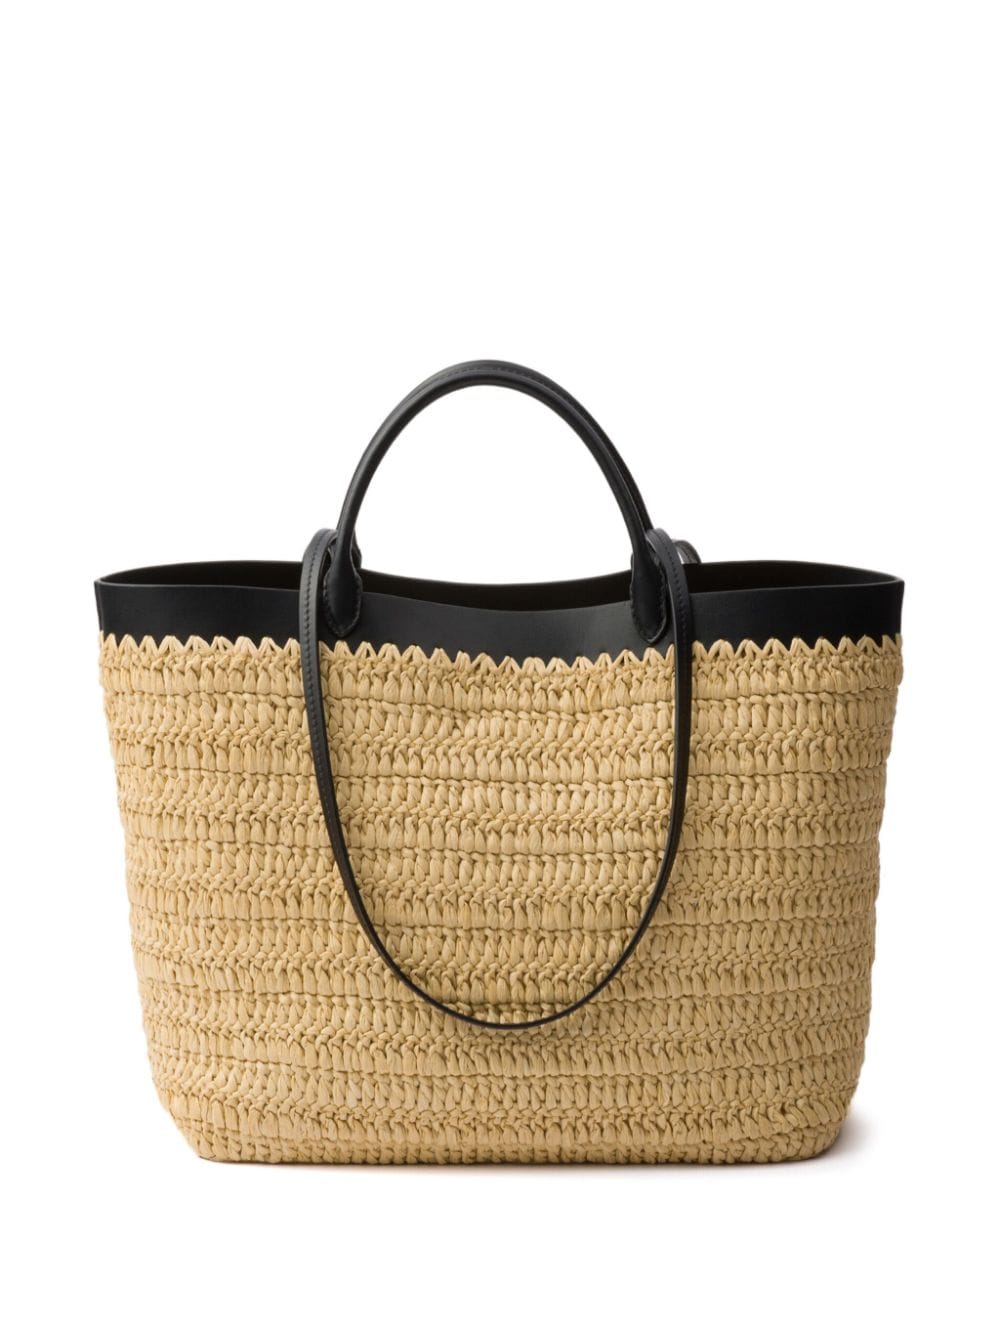 Image 2 of Prada leather-trimmed woven tote bag